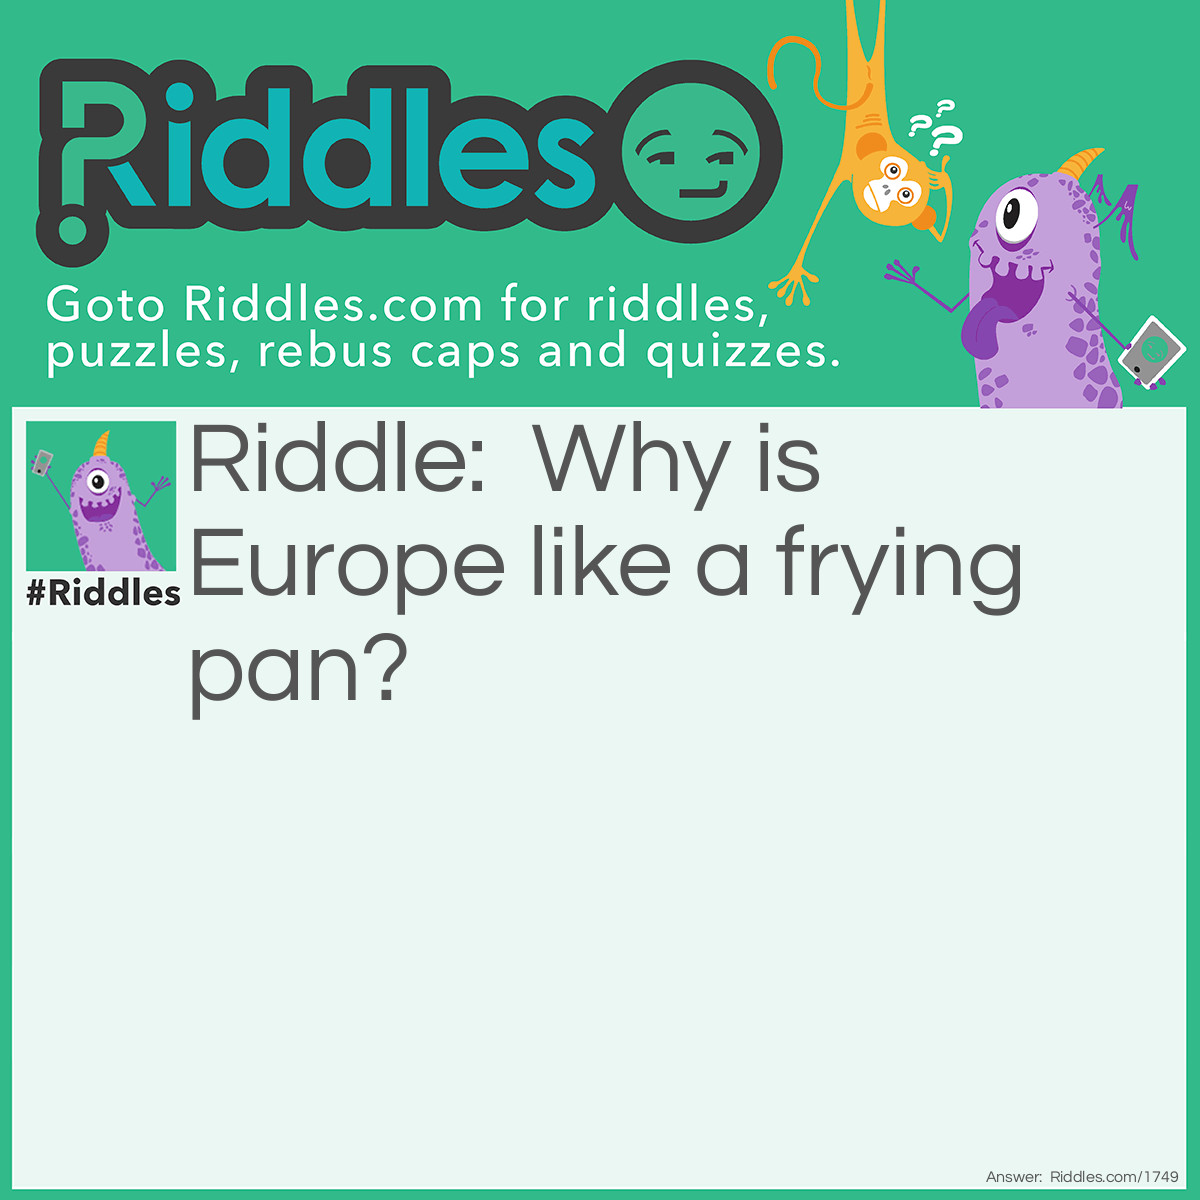 Riddle: Why is Europe like a frying pan? Answer: Because it has Greece at the bottom.